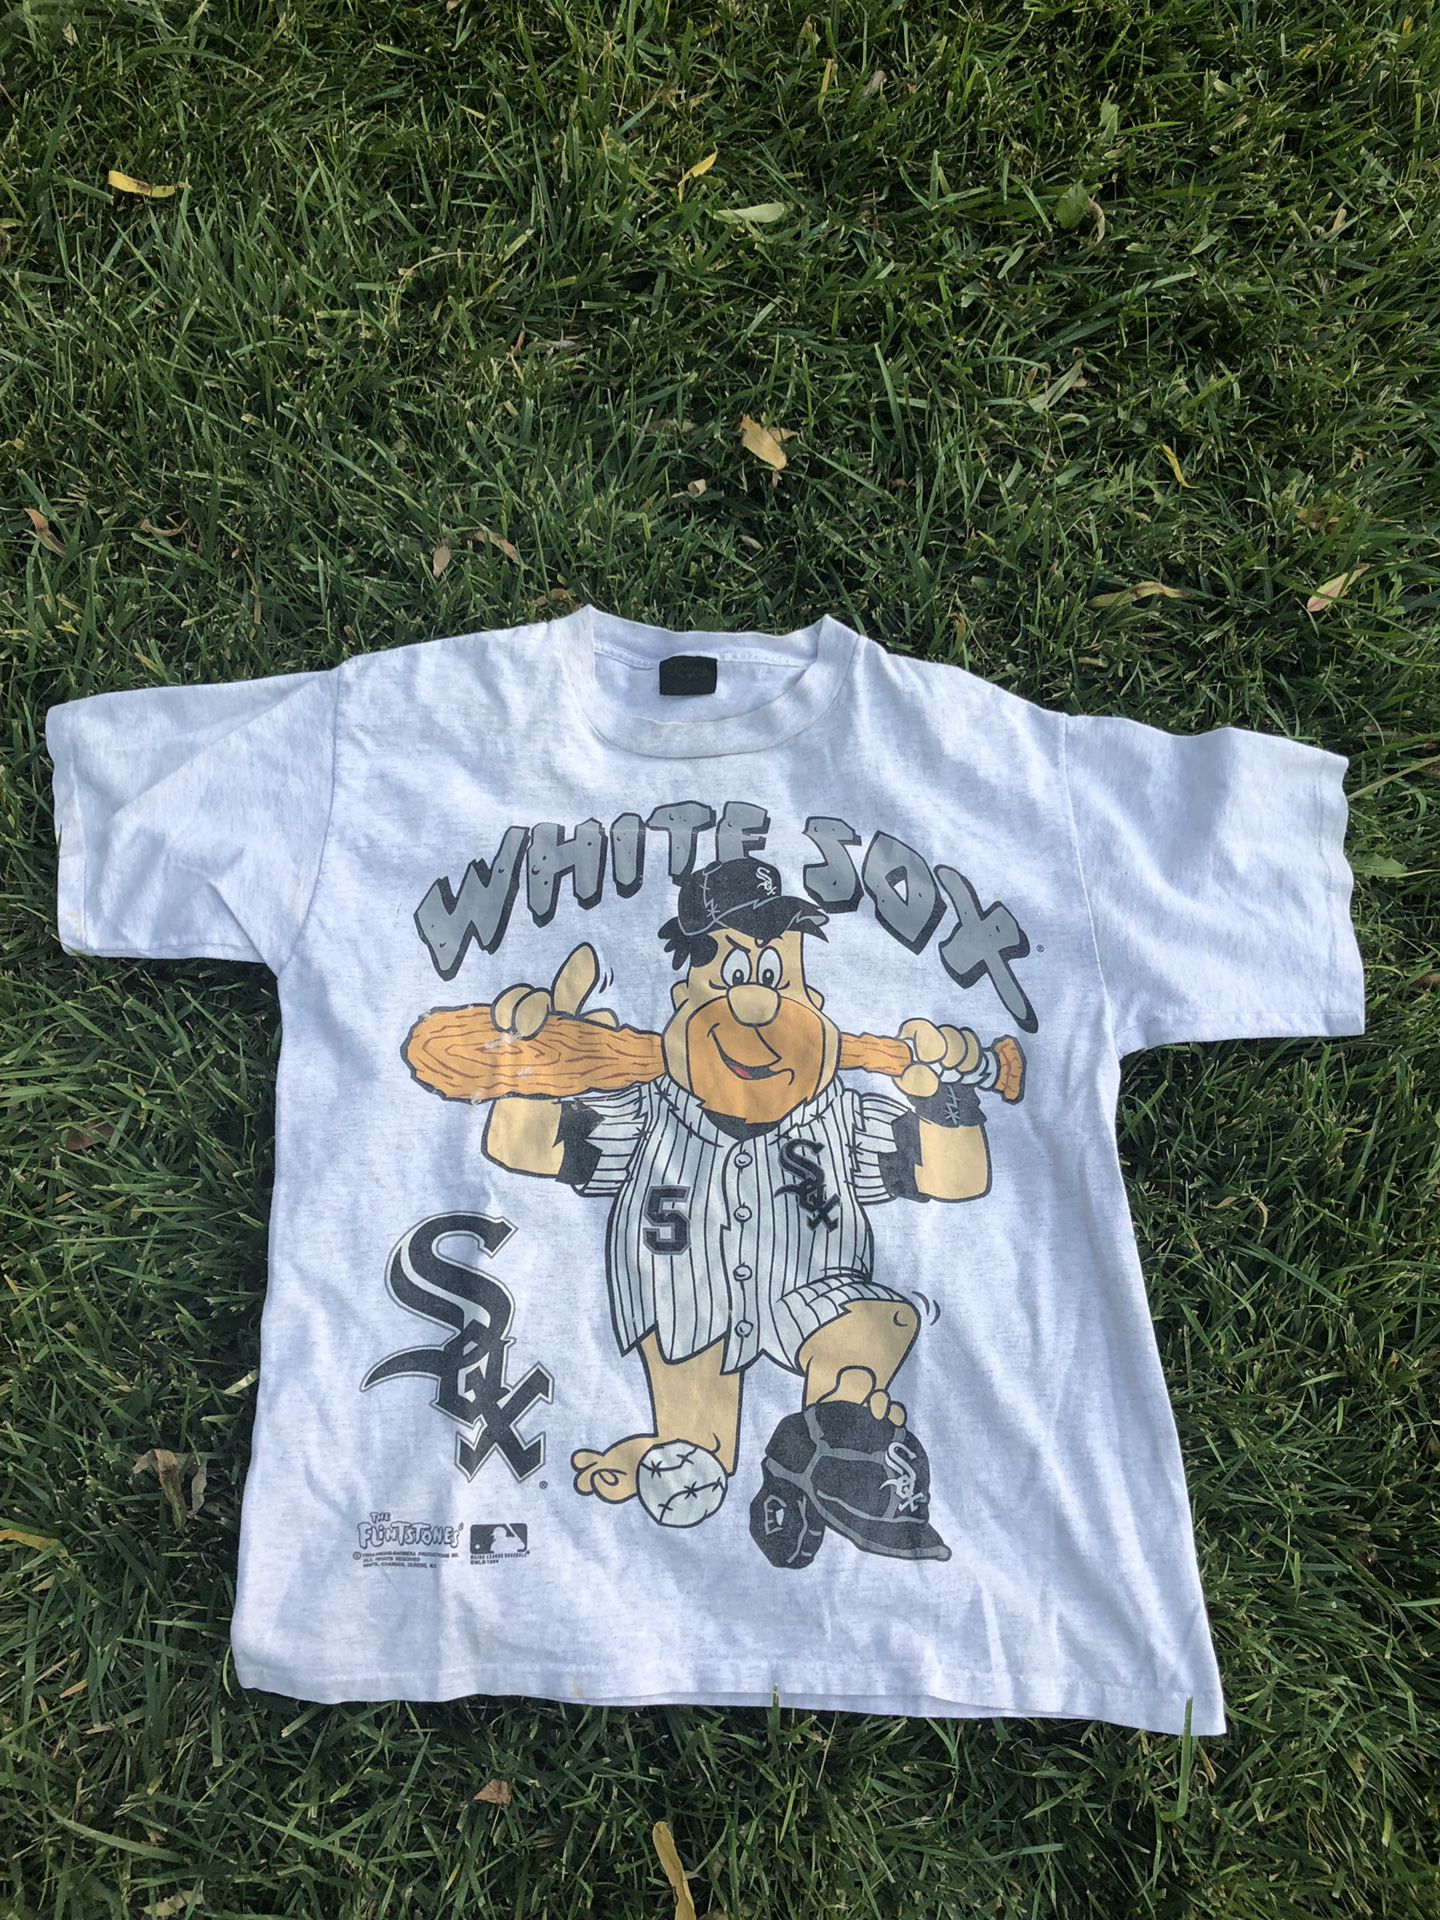 chicago white sox shirts for sale